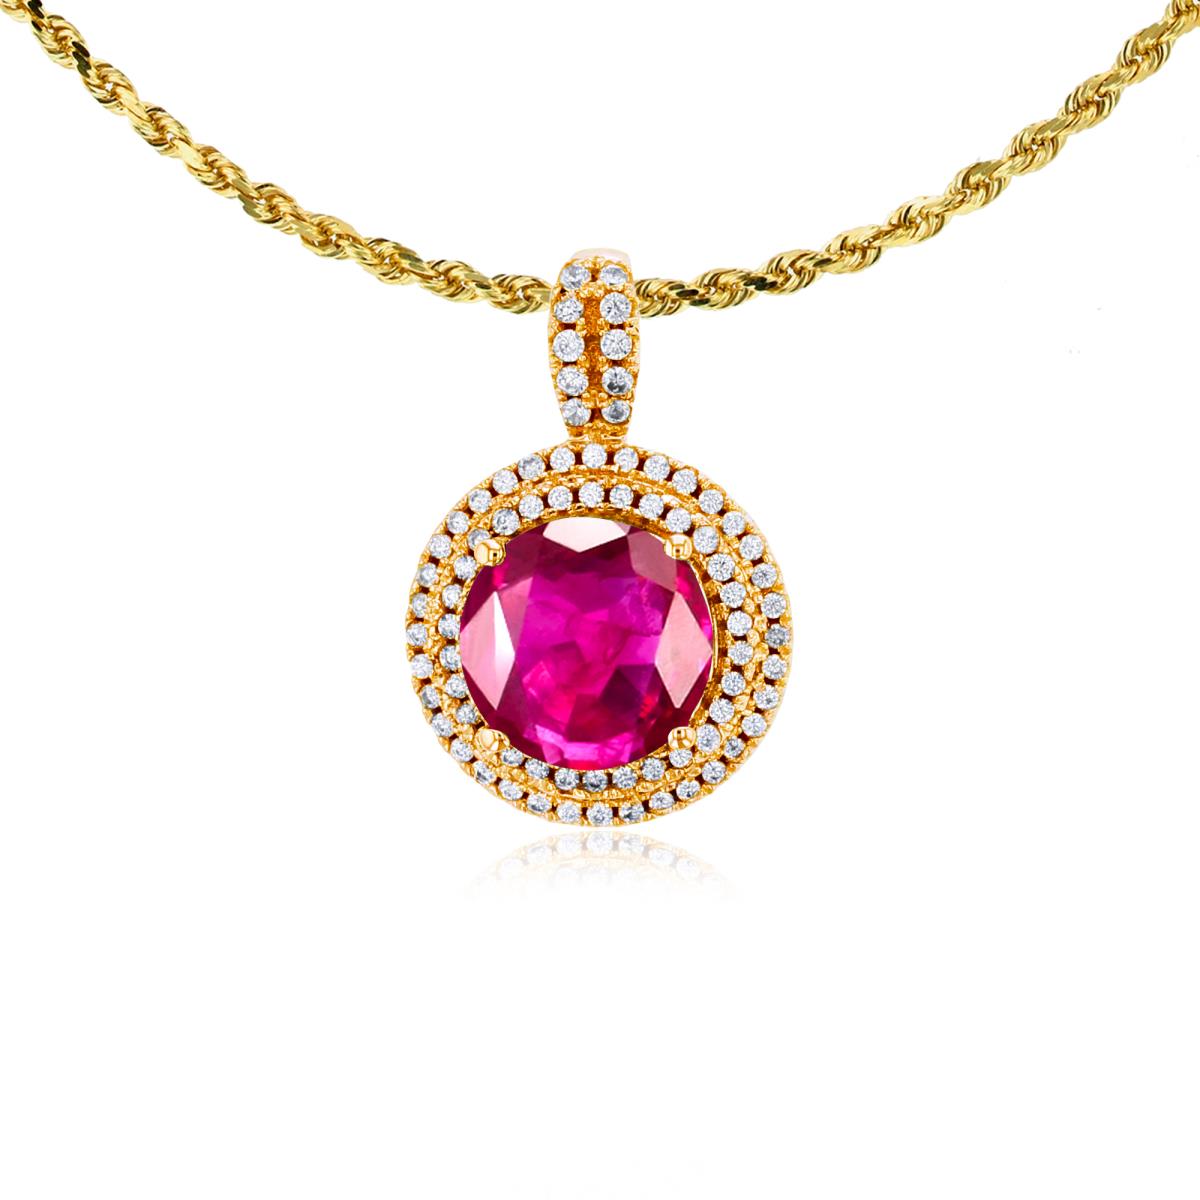 10K Yellow Gold 7mm Round Glass Filled Ruby & 0.25 CTTW Diamonds Double Halo 18" Rope Chain Necklace